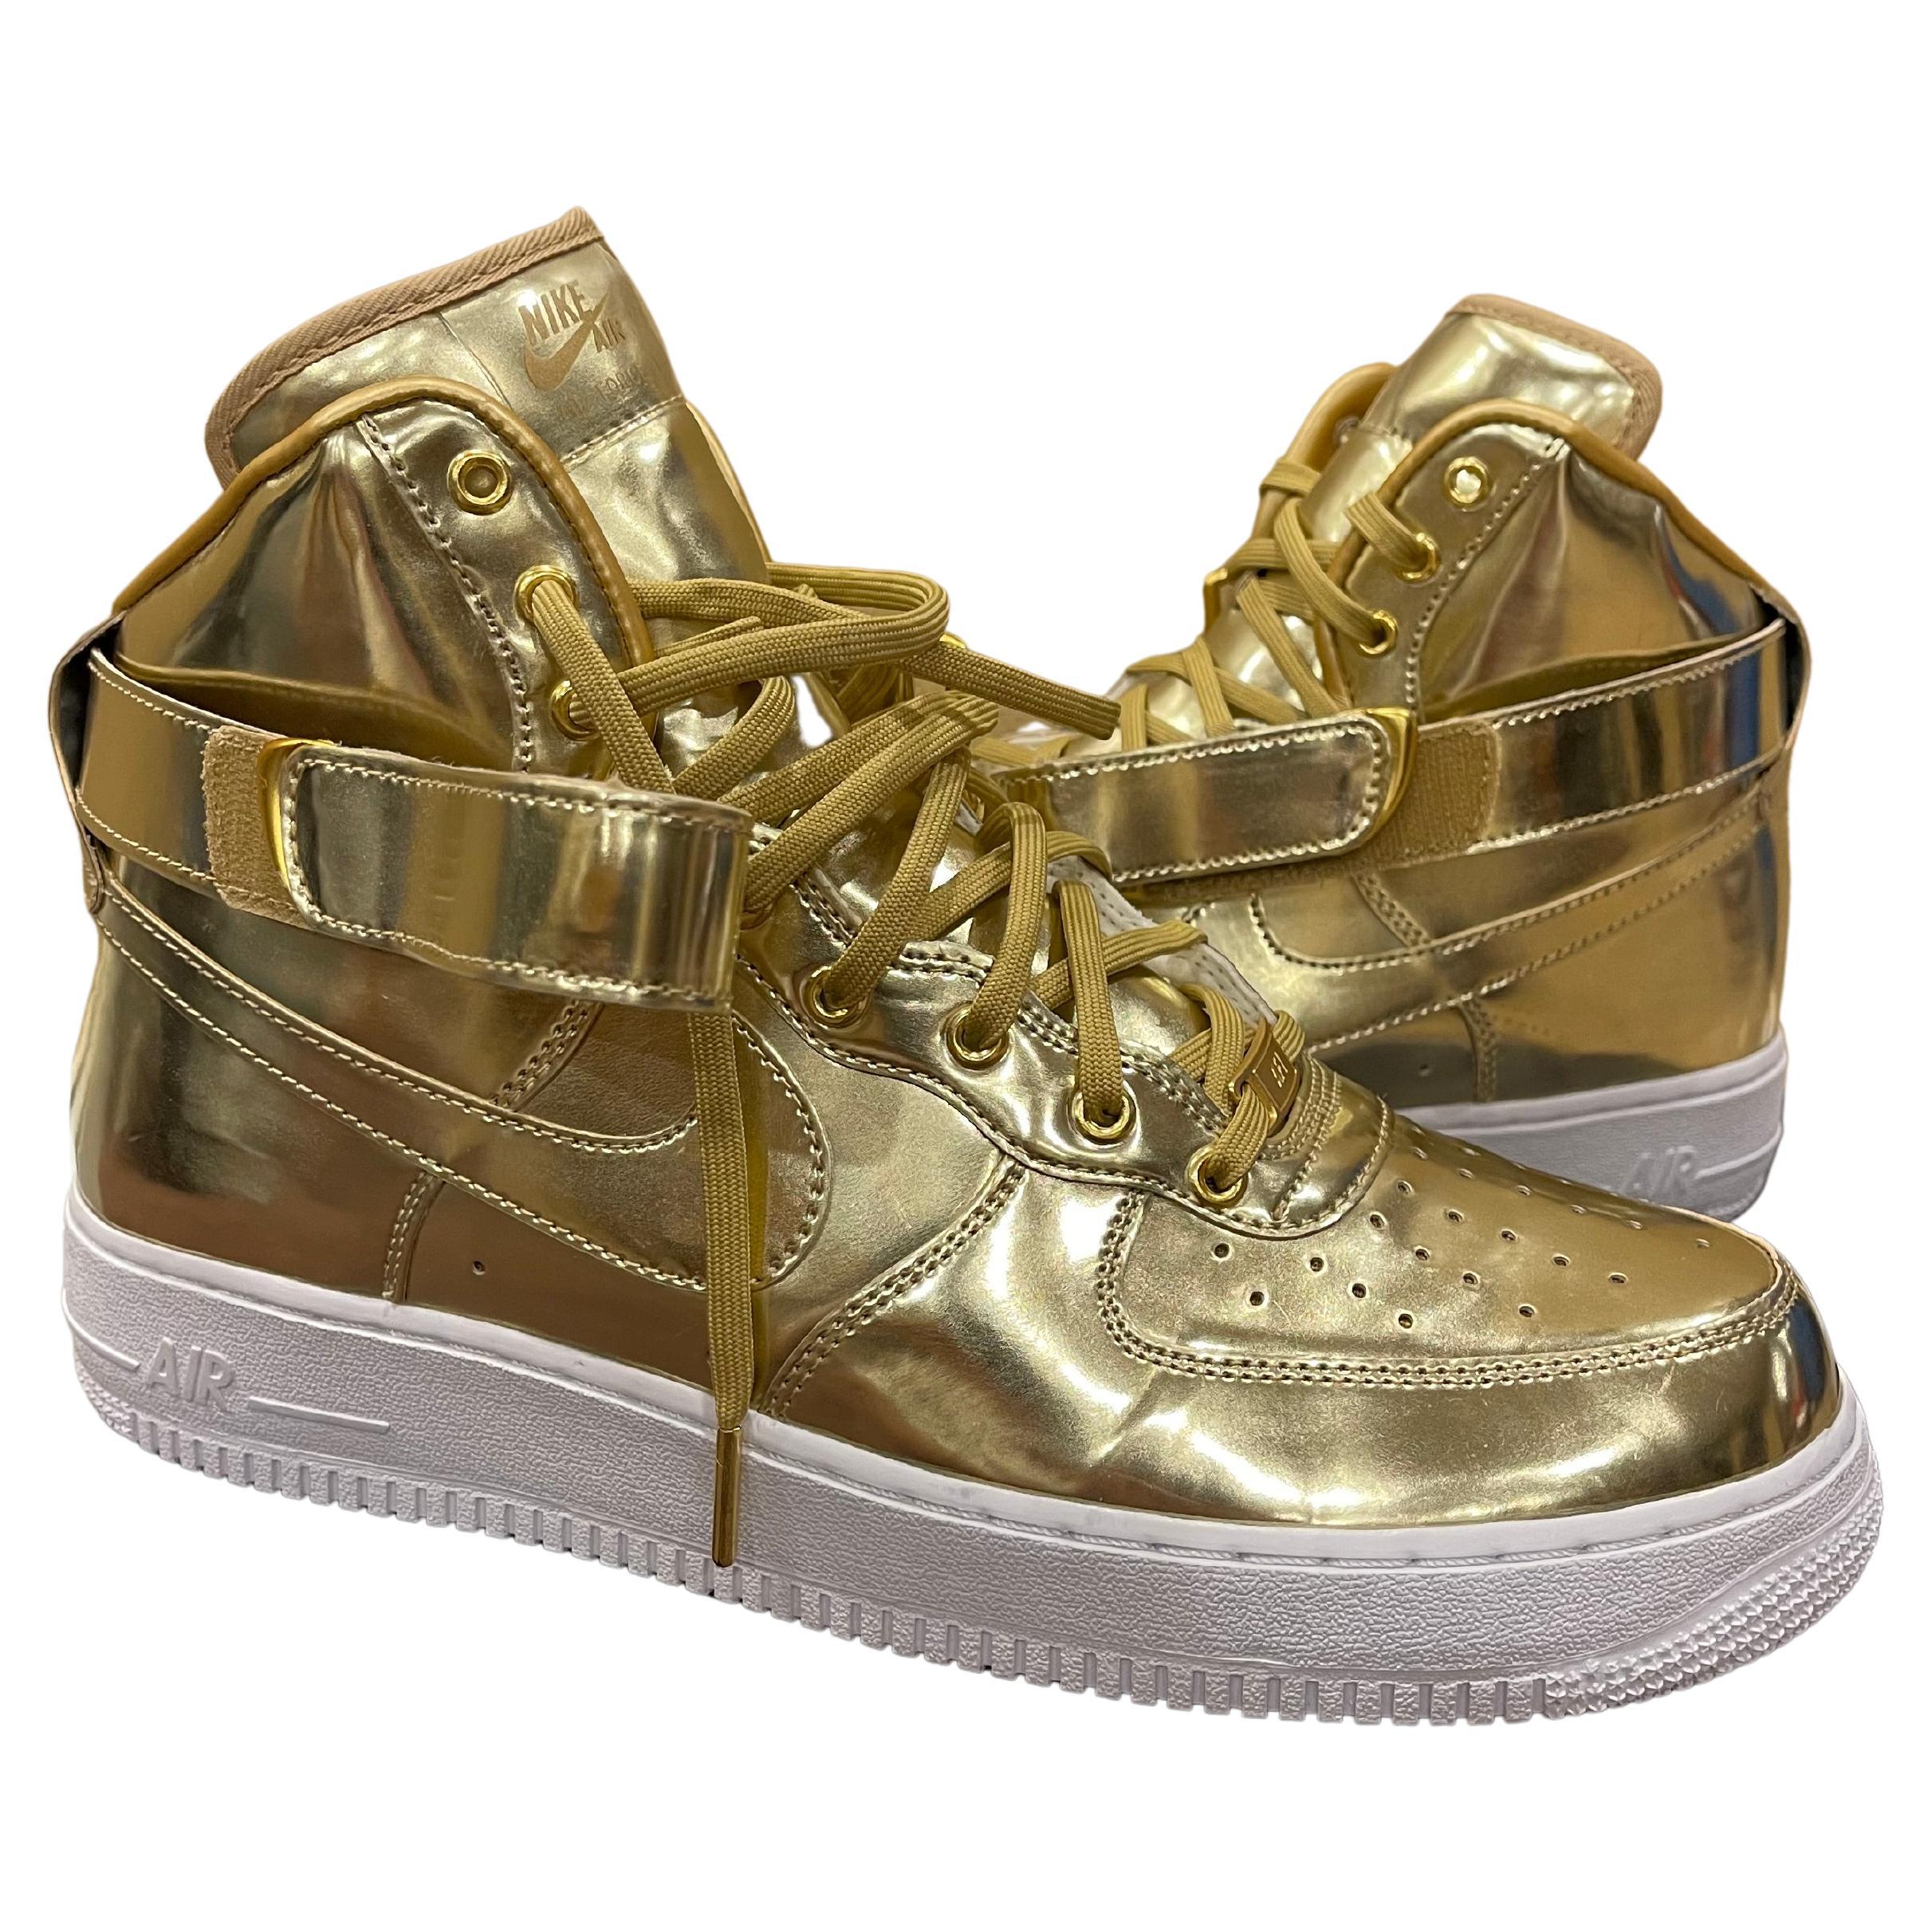 Nike ID Air Force 1 Gold Metallic / Liquid Gold Highs For Sale at 1stDibs |  air force flower 70's edizione limitata, air force 1 nike id, air force 1 id